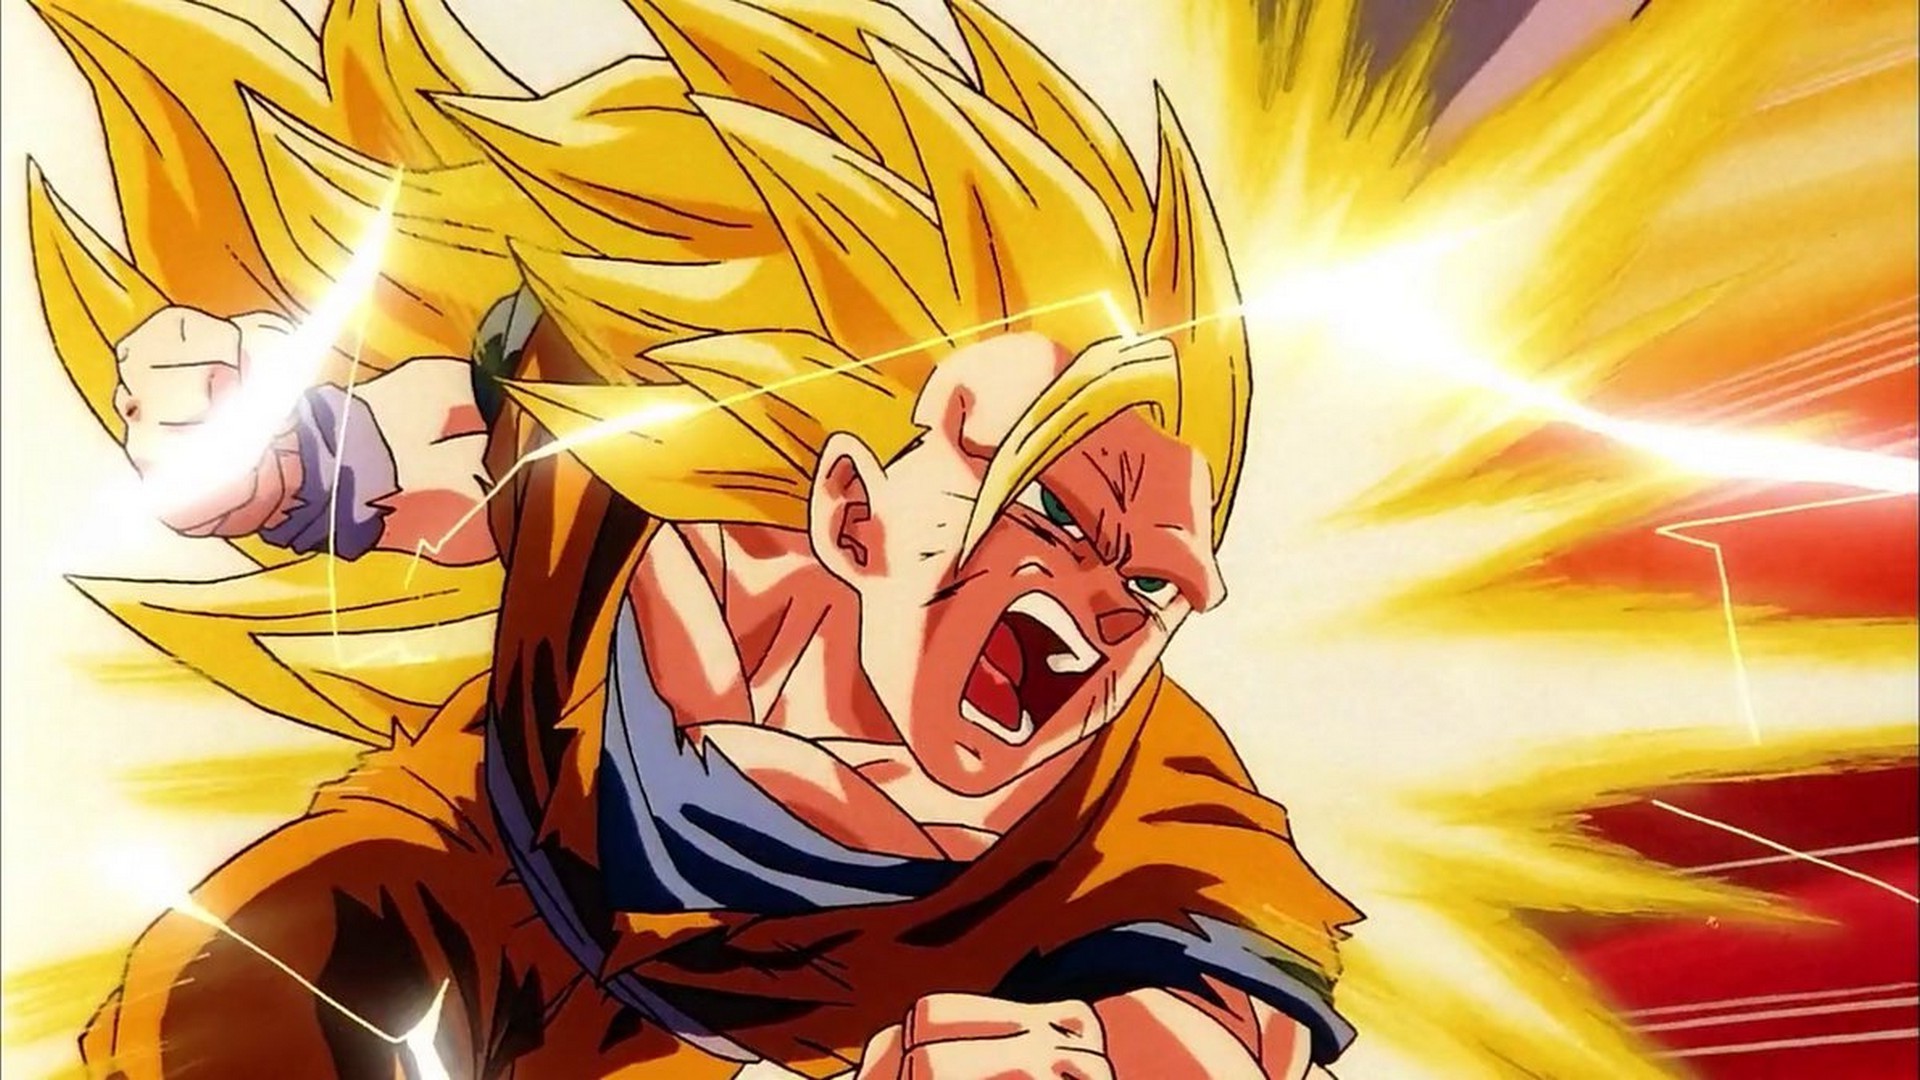 Wallpapers Goku SSJ3 with image resolution 1920x1080 pixel. You can make this wallpaper for your Desktop Computer Backgrounds, Mac Wallpapers, Android Lock screen or iPhone Screensavers